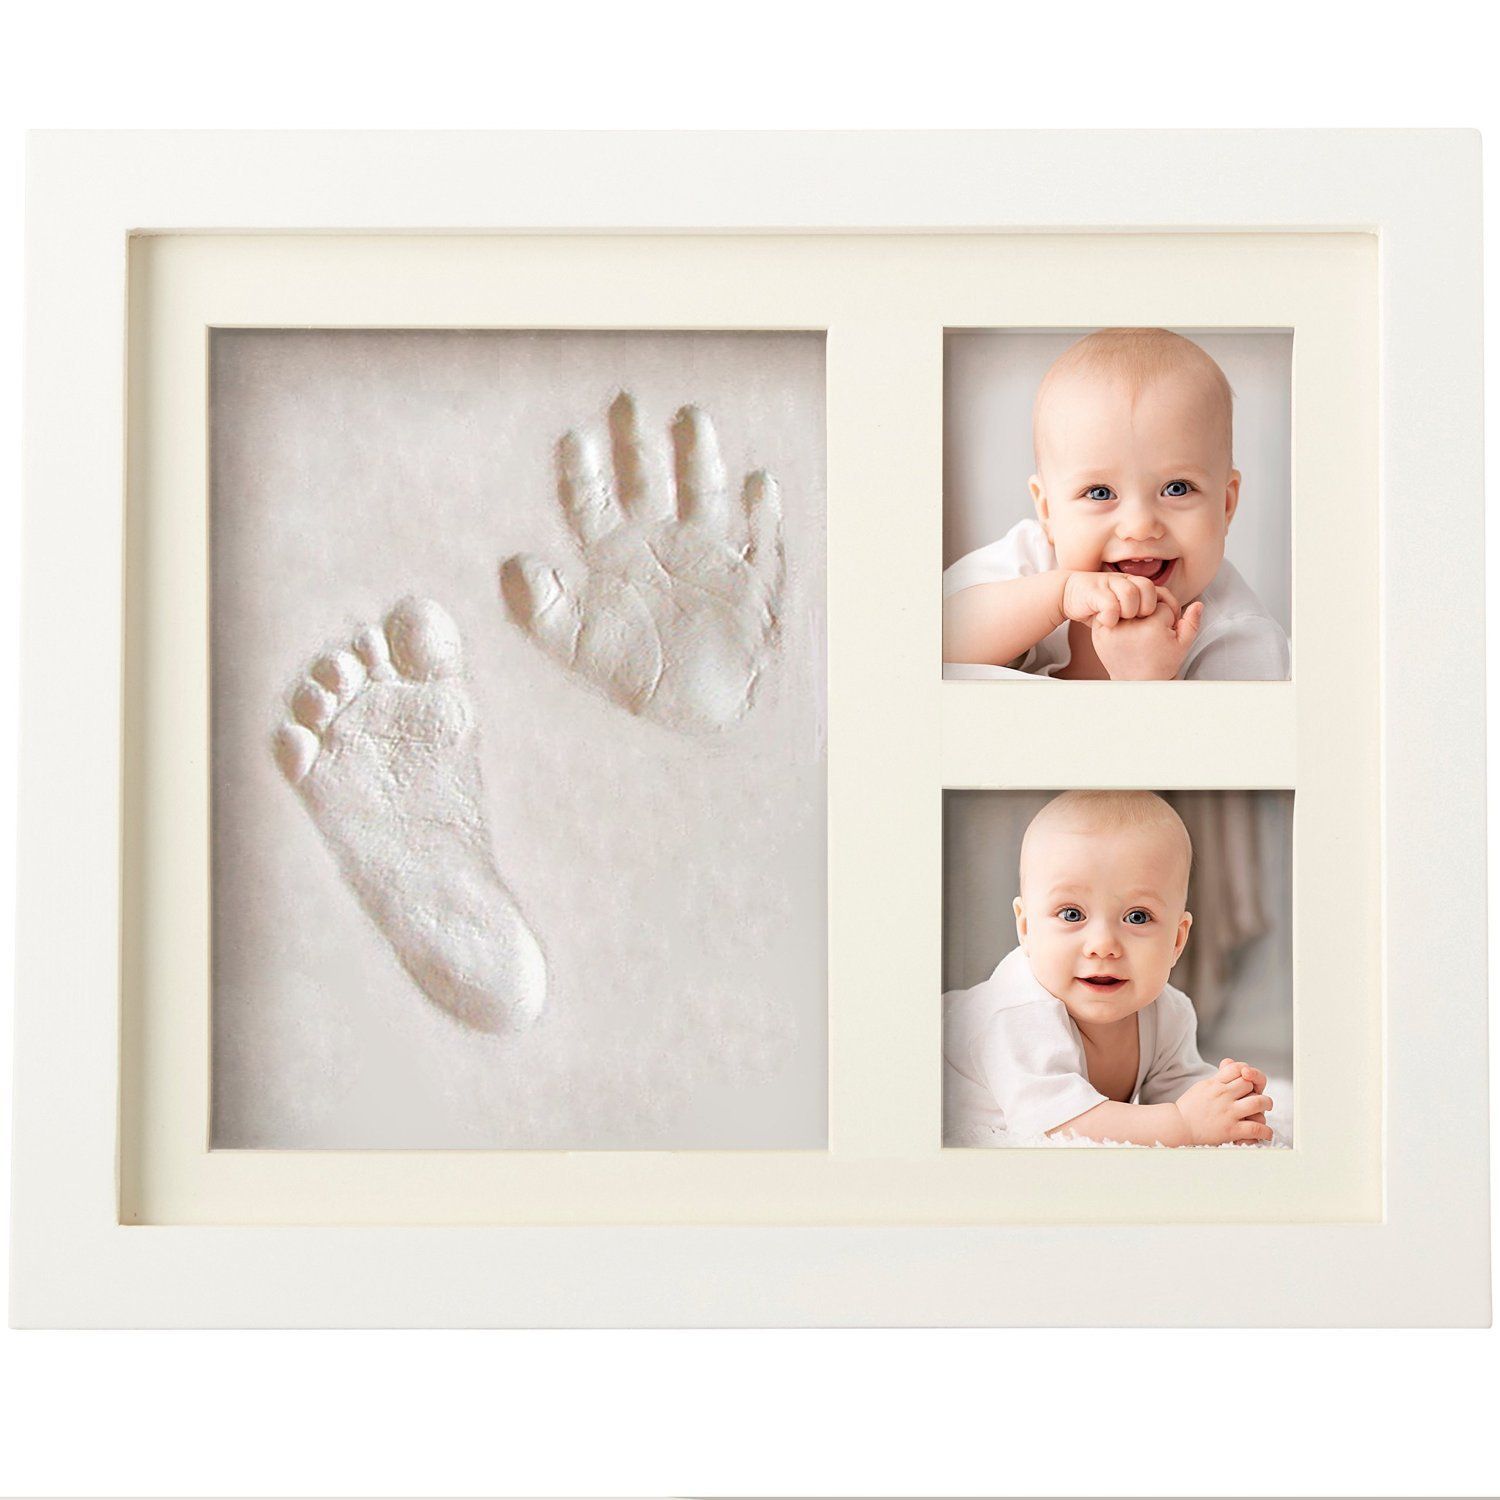 BEST BABY HAND & FOOTPRINT PICTURE FRAME KIT for Boys and Girls, Cool & Unique Baby Shower Gifts for Registry, Memorable Keepsakes Decorations for Room Wall or Table Decor, Premium Clay & Wood Frame -   19 diy Baby crafts ideas